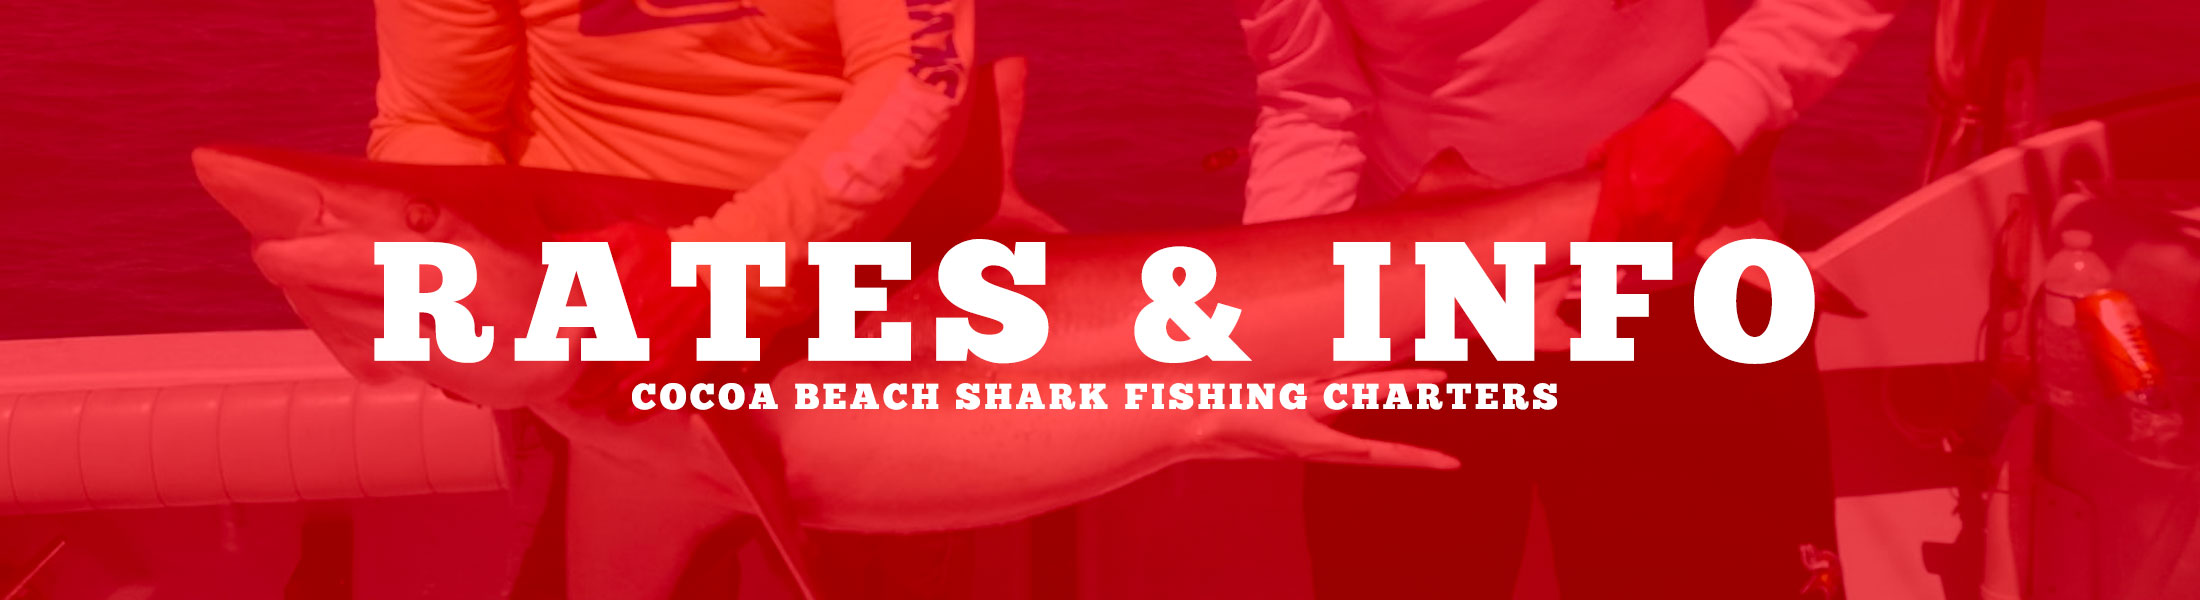 Get rates and information on the #1 shark fishing charter in Cocoa Beach Florida.